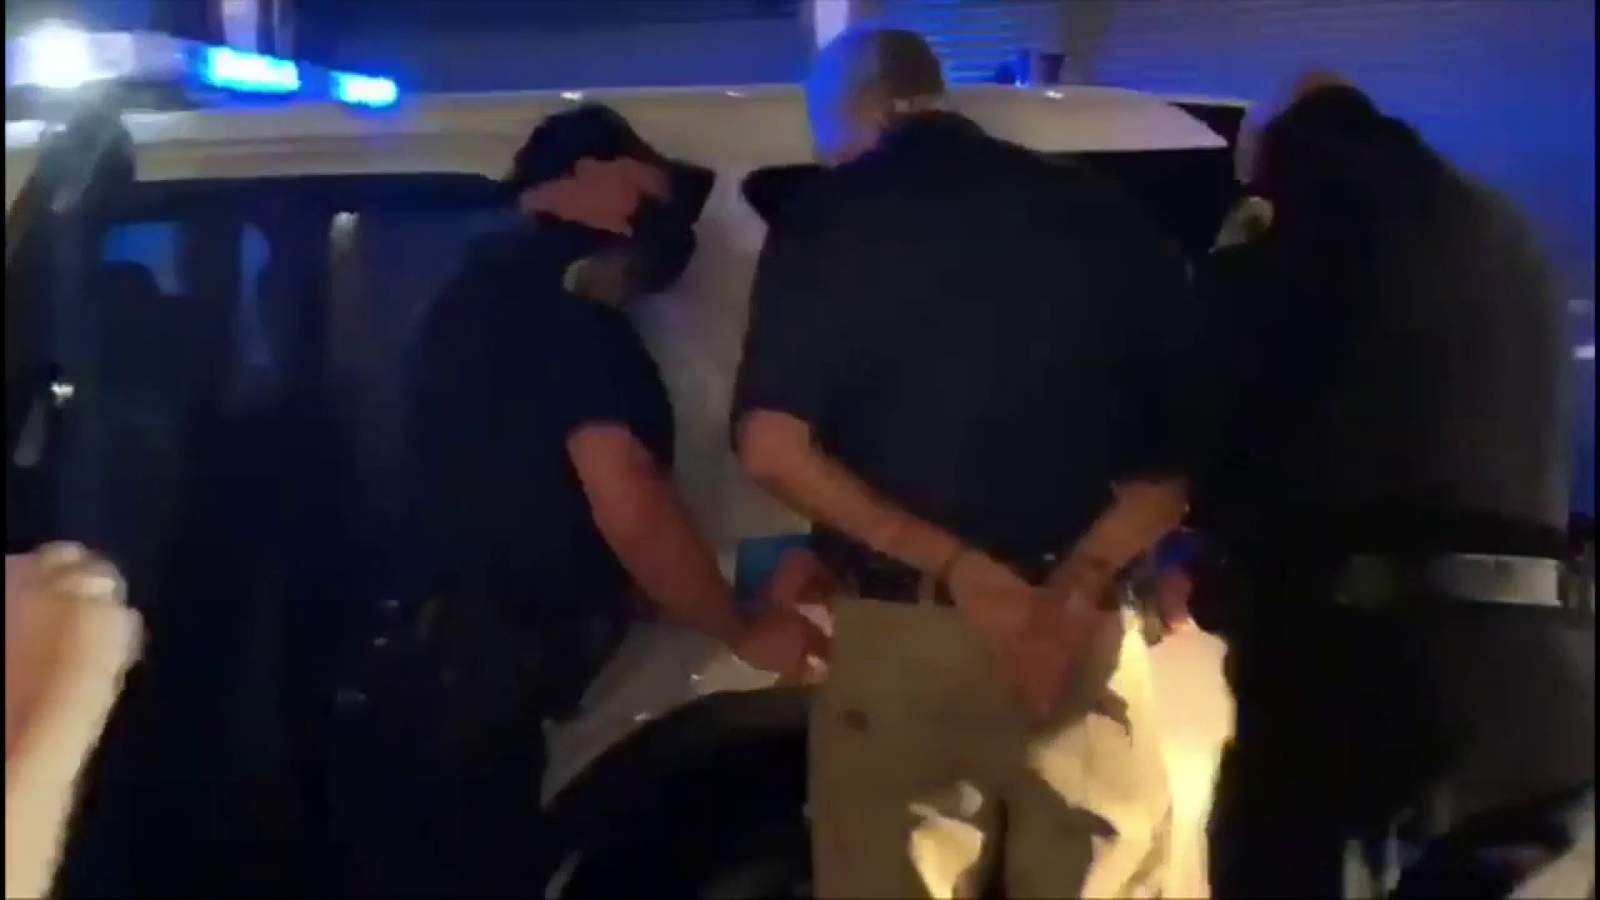 Key West restaurant owner arrested after refusing to close doors after curfew